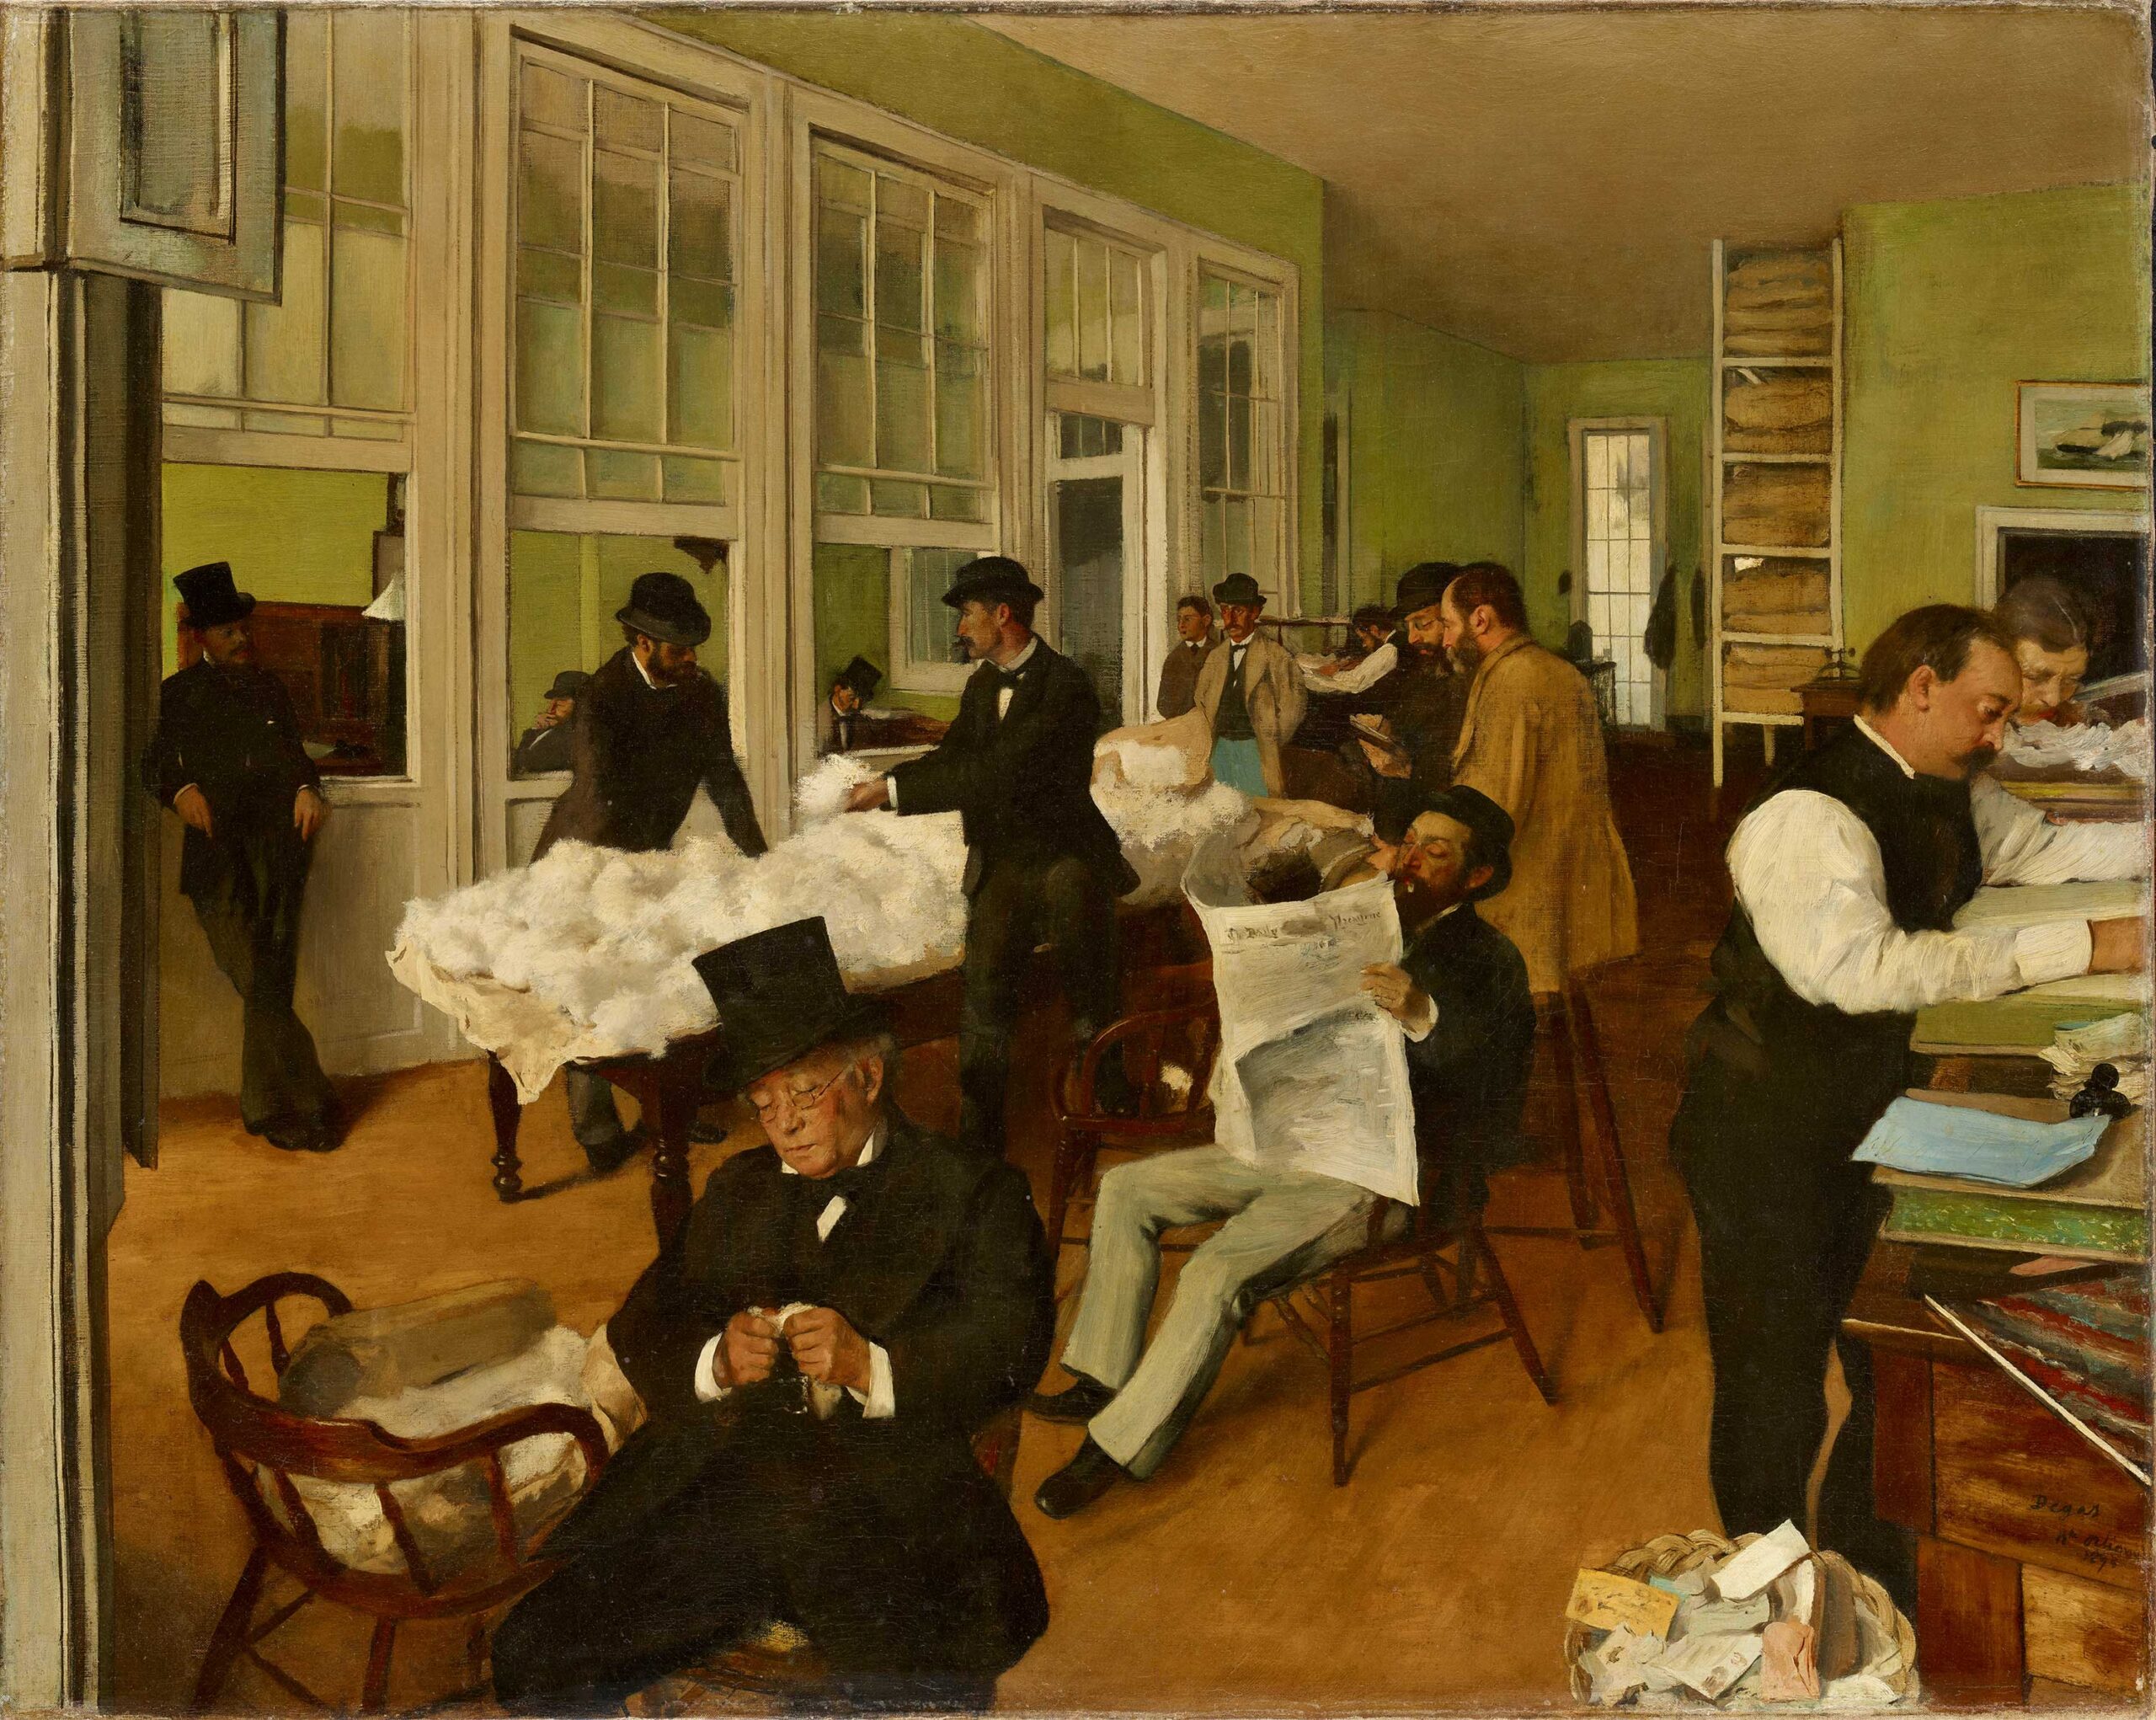 Degas painting - Cotton Office in New Orleans